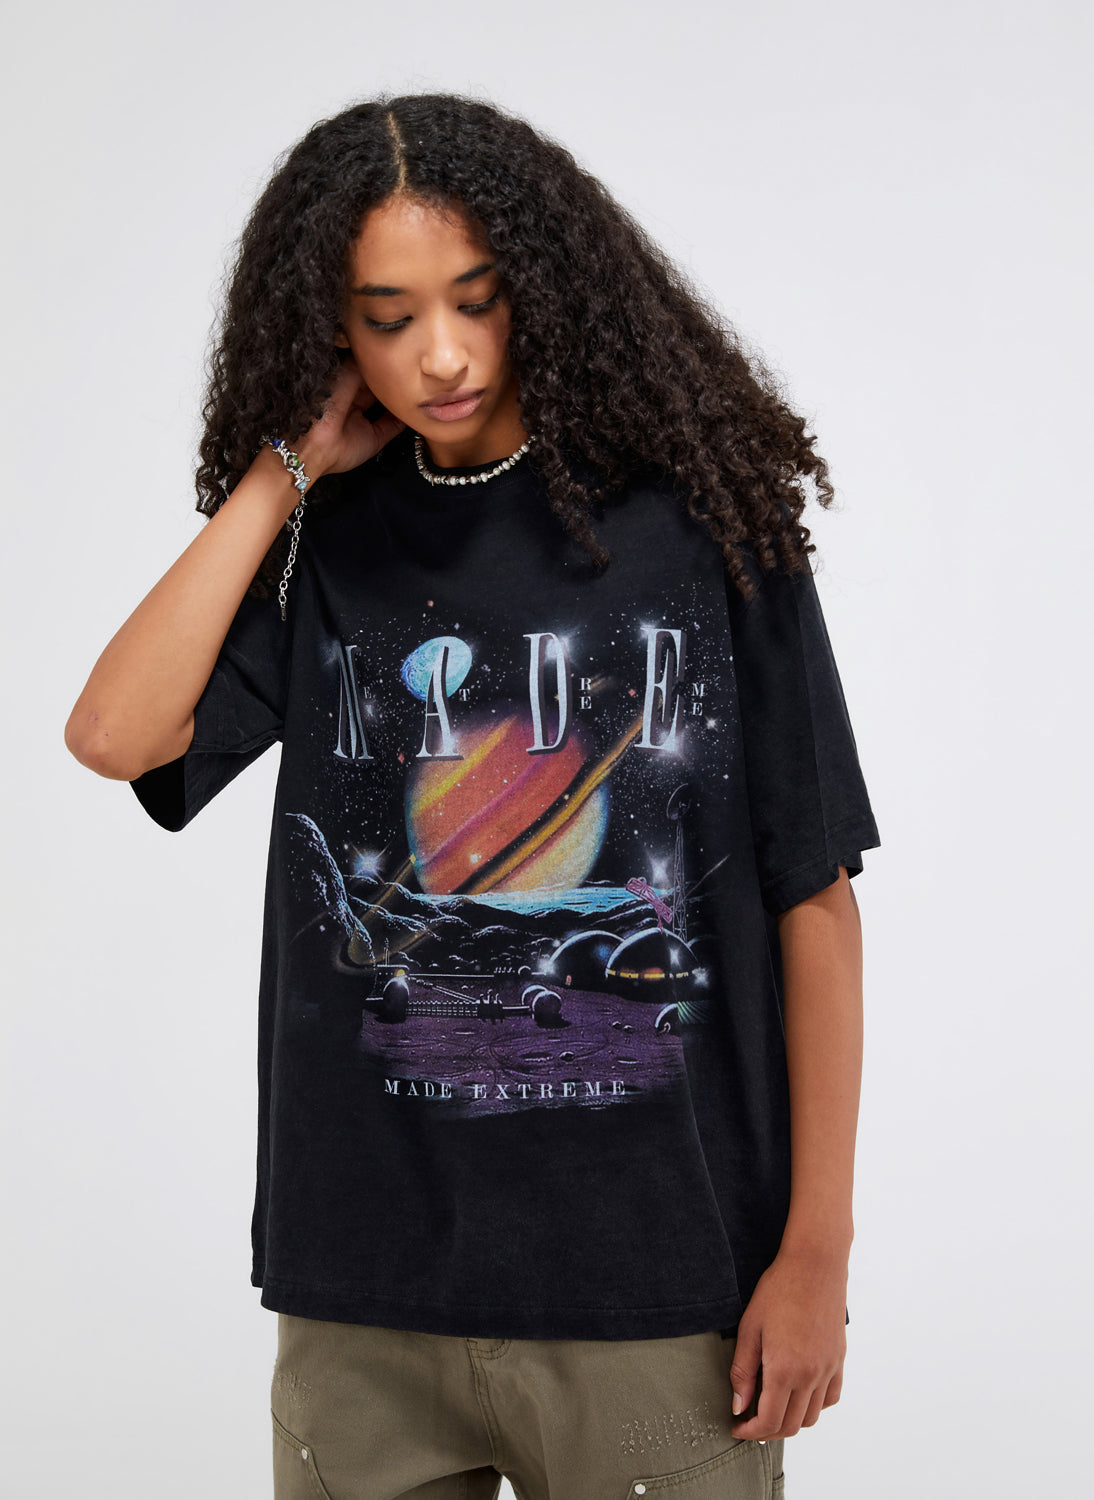 "IN THE MIDDLE OF THE BIG UNIVERSE WHERE AM I" T-SHIRT